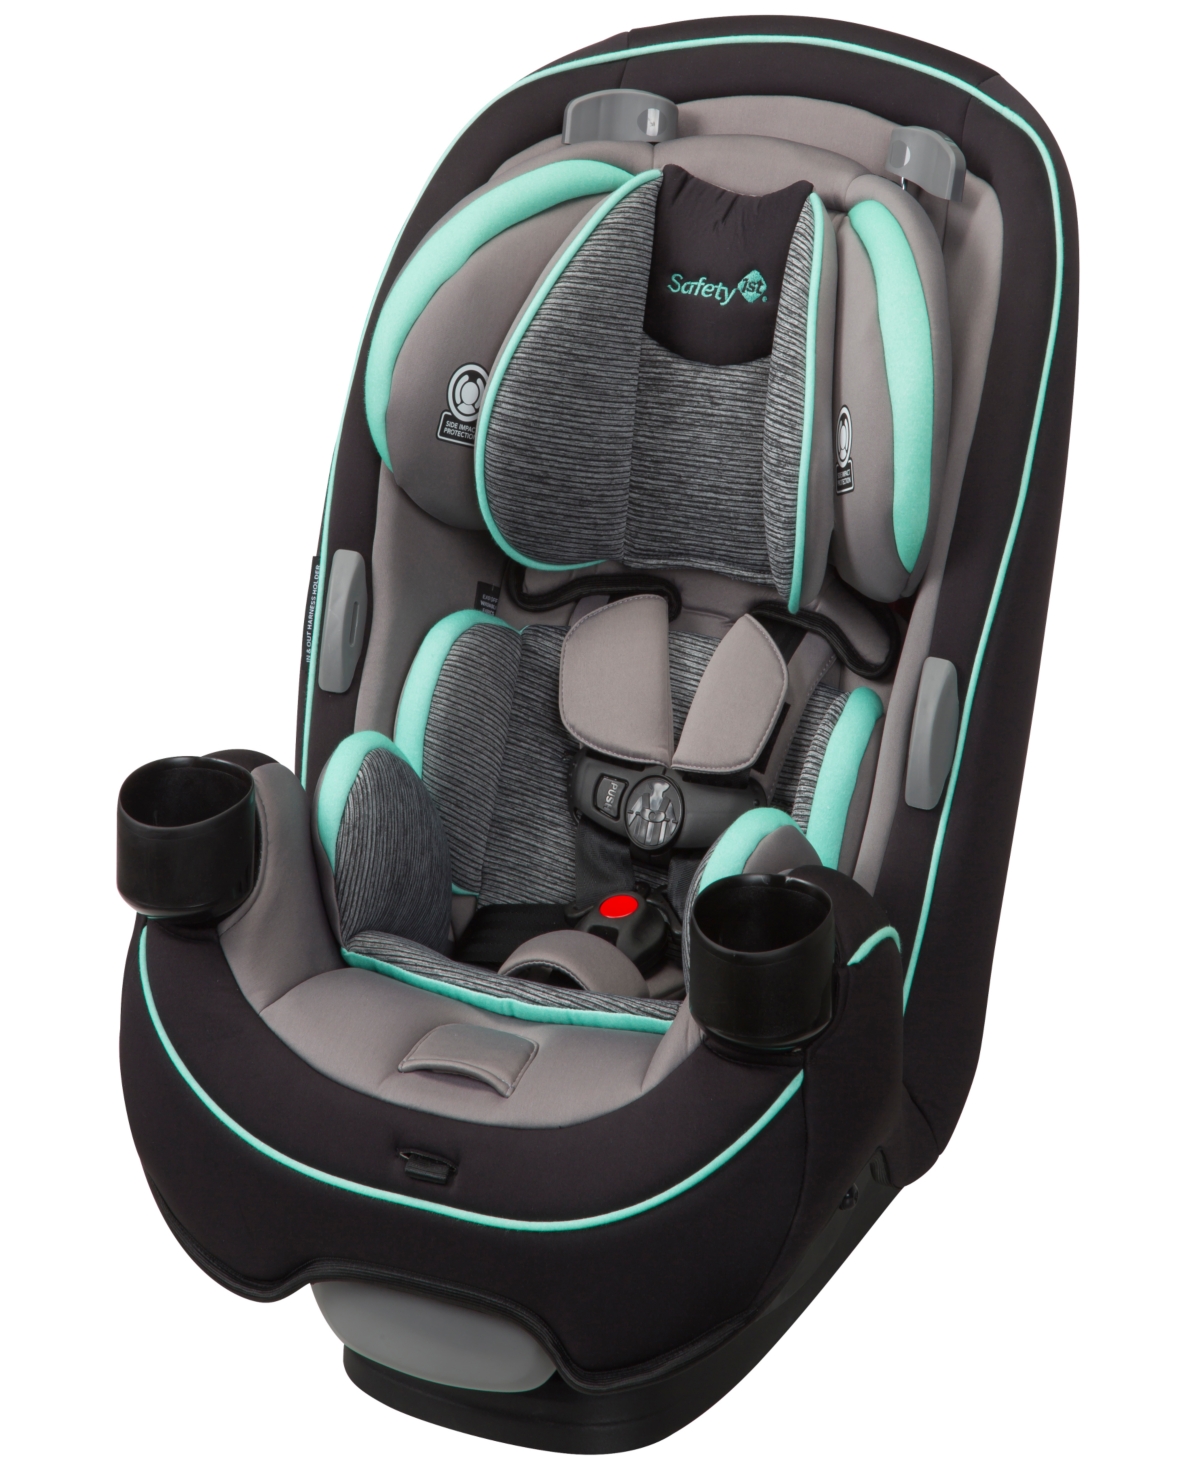 Safety 1st Grow And Go 3-in-1 Convertible Car Seat In Aqua Pop